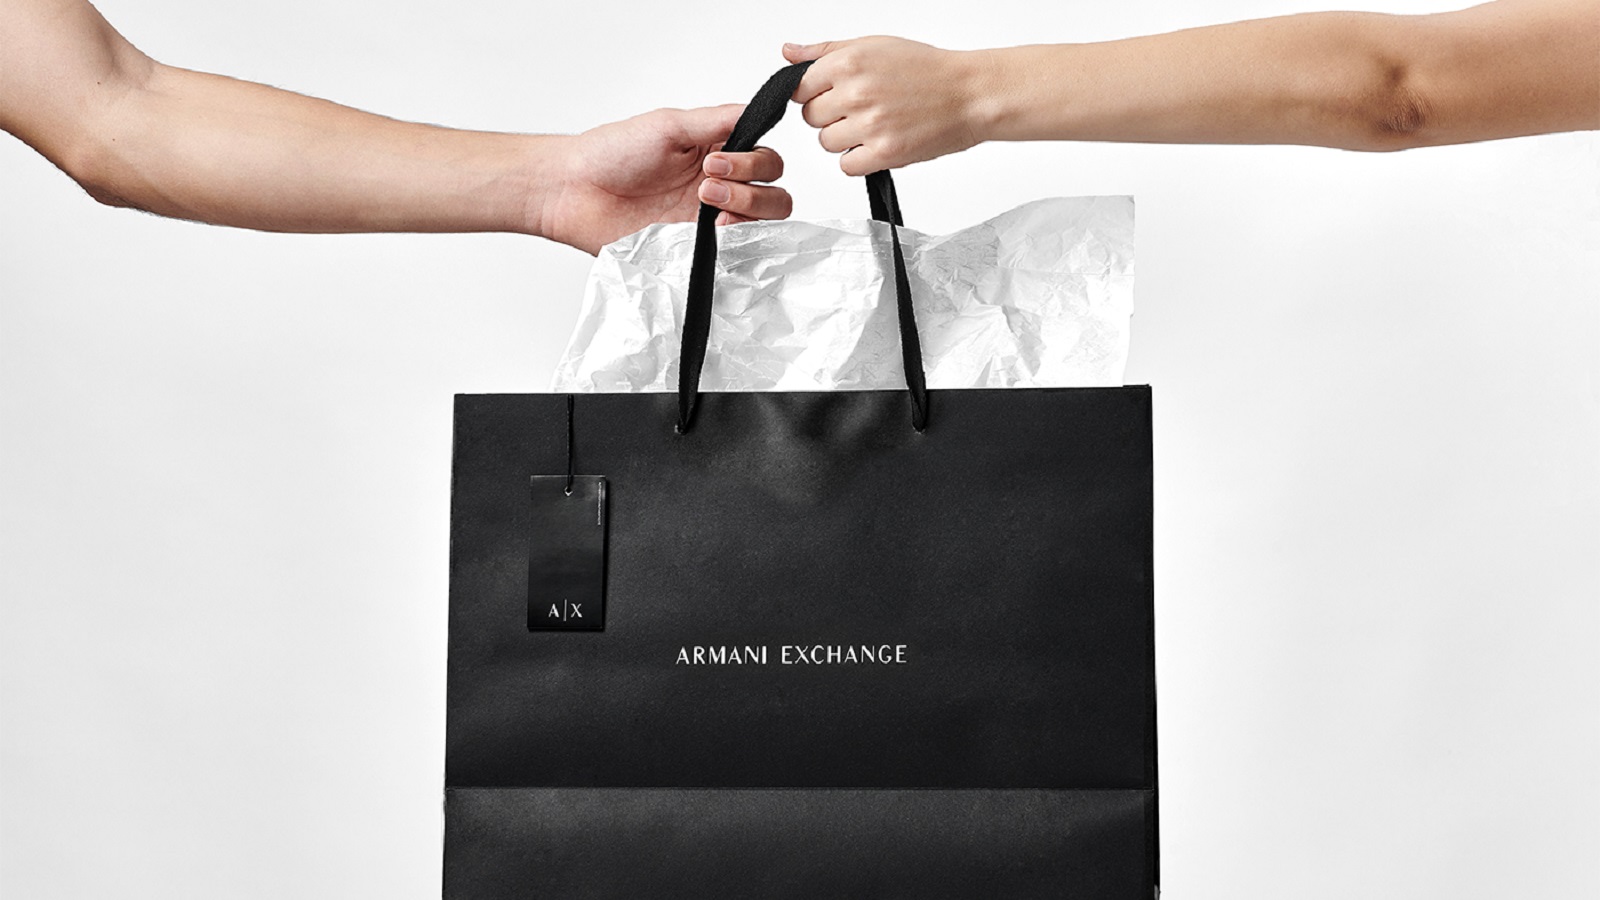 Armani Exchange Boosts Its Looks to Reach Wider Audience